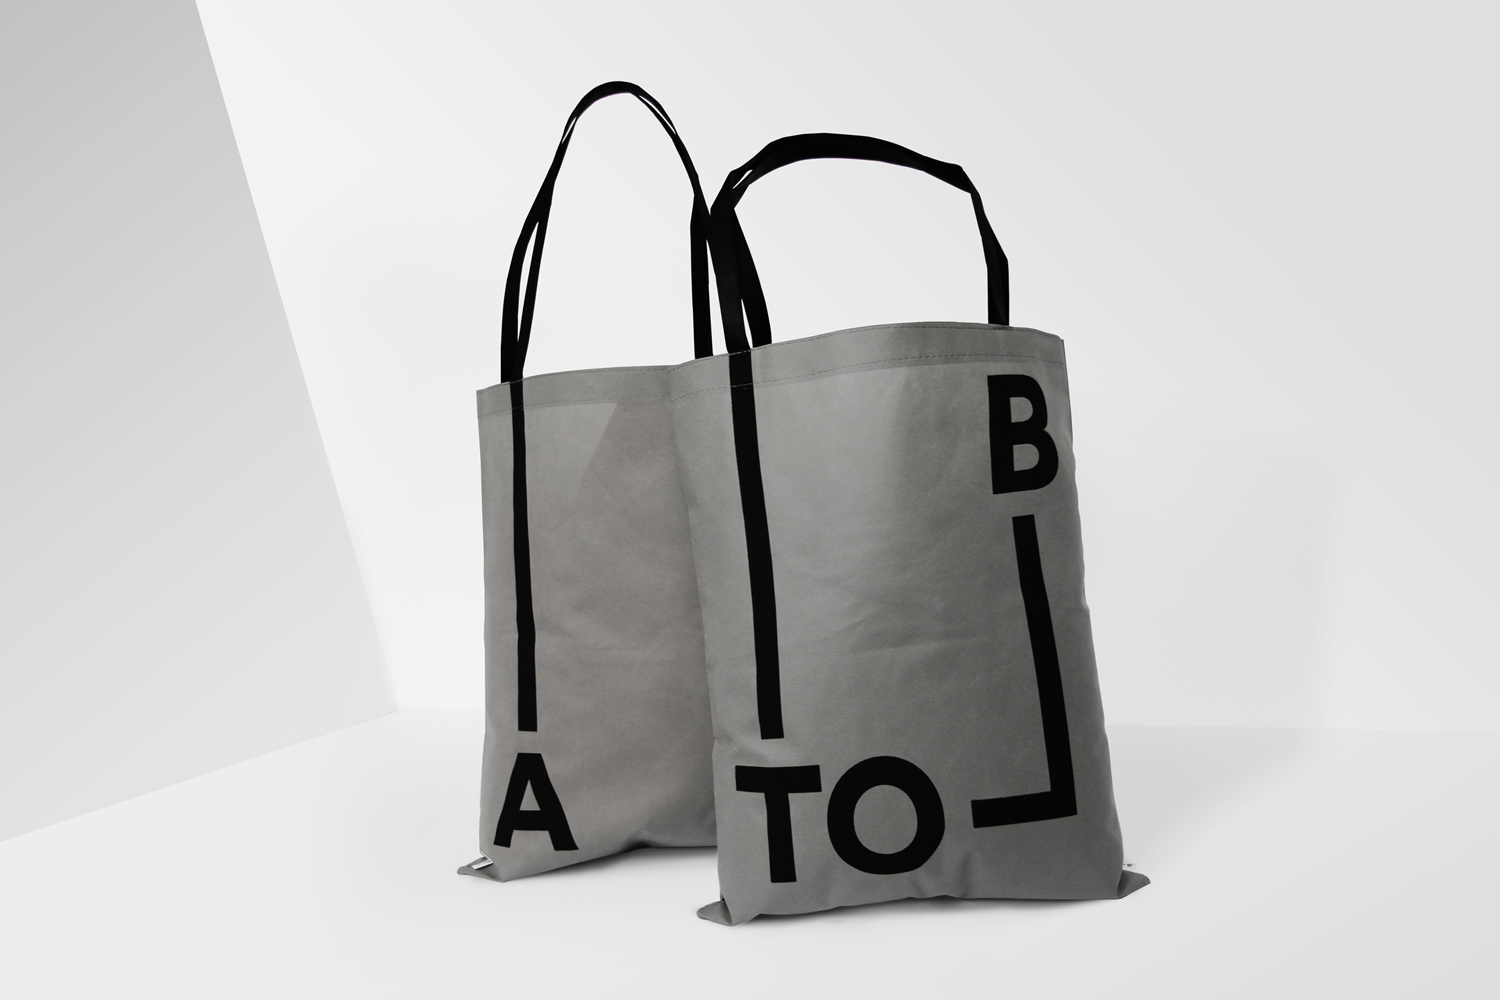 Brand identity and branded tote bags for Scandinavian retailer, bag and travel specialist A-TO-B by Stockholm Design Lab